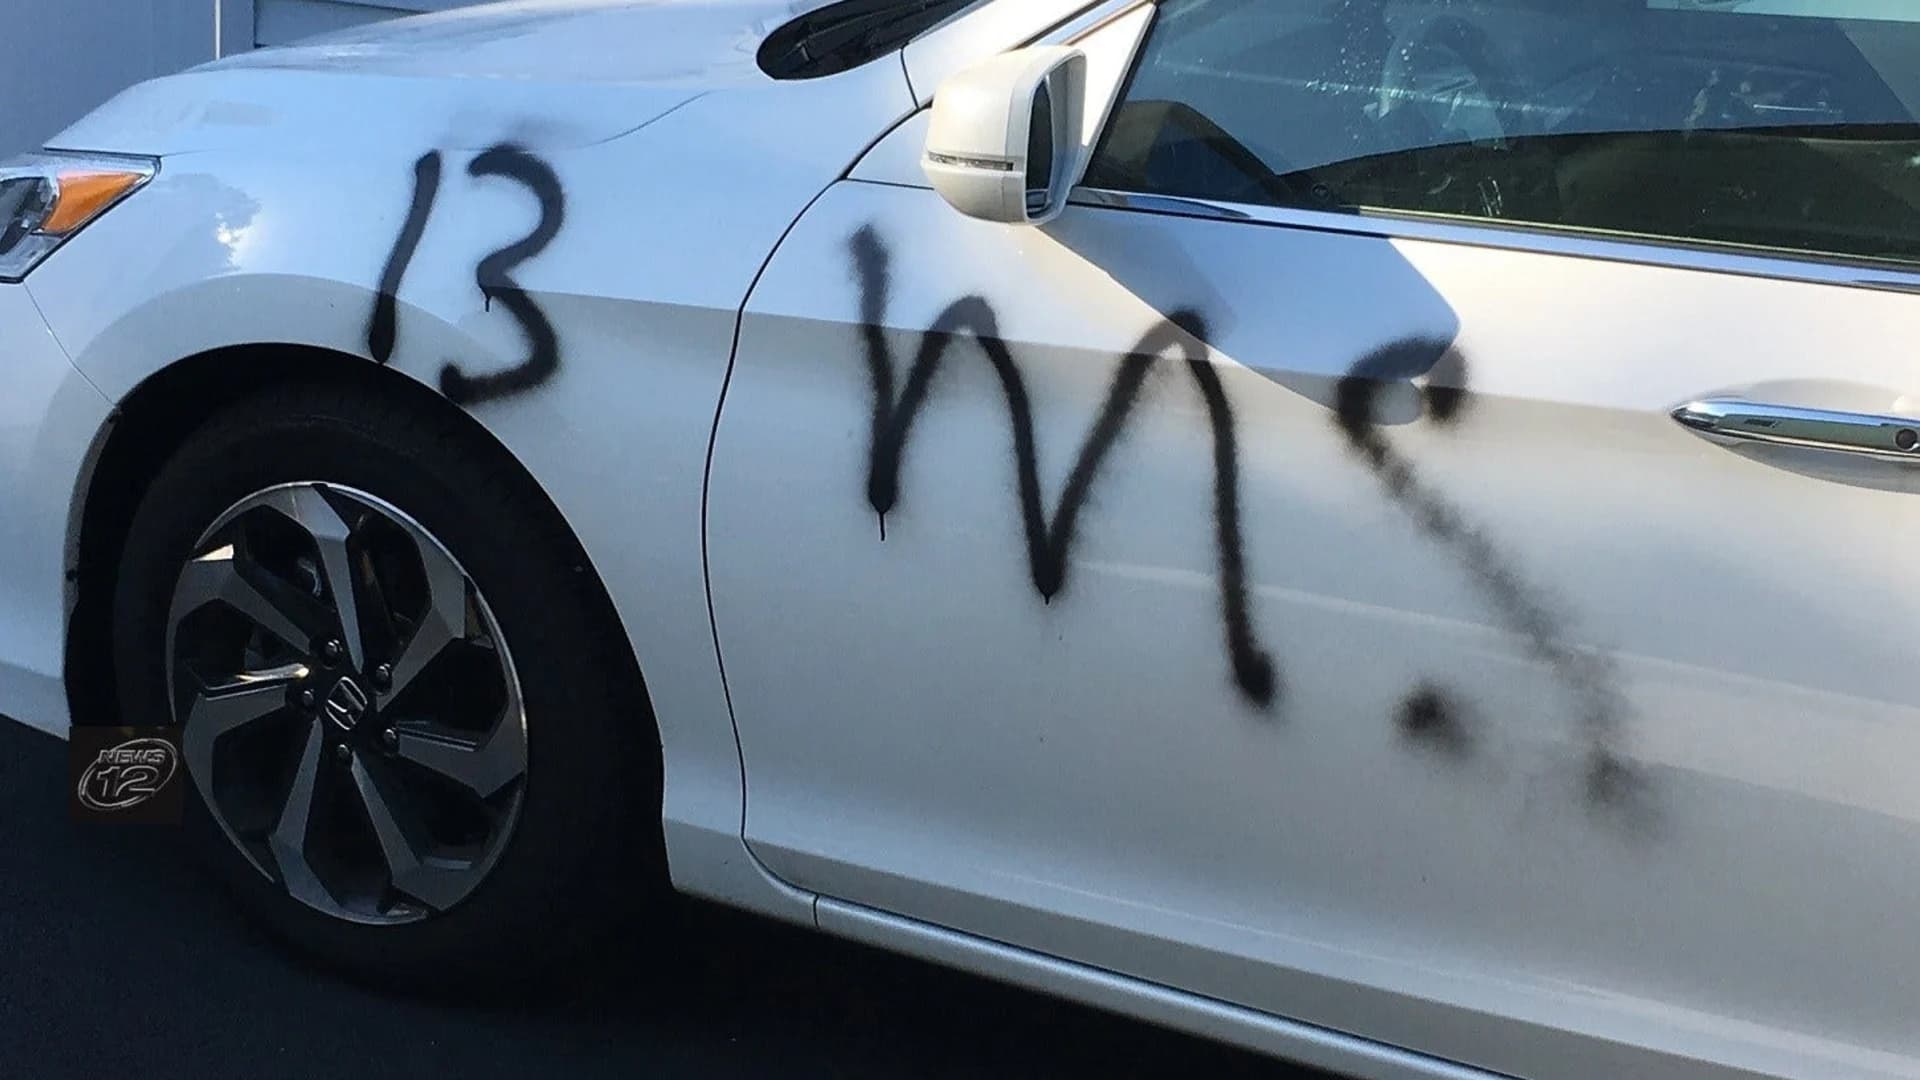 'MS 13' gang tag defaces cars, fence in Hicksville